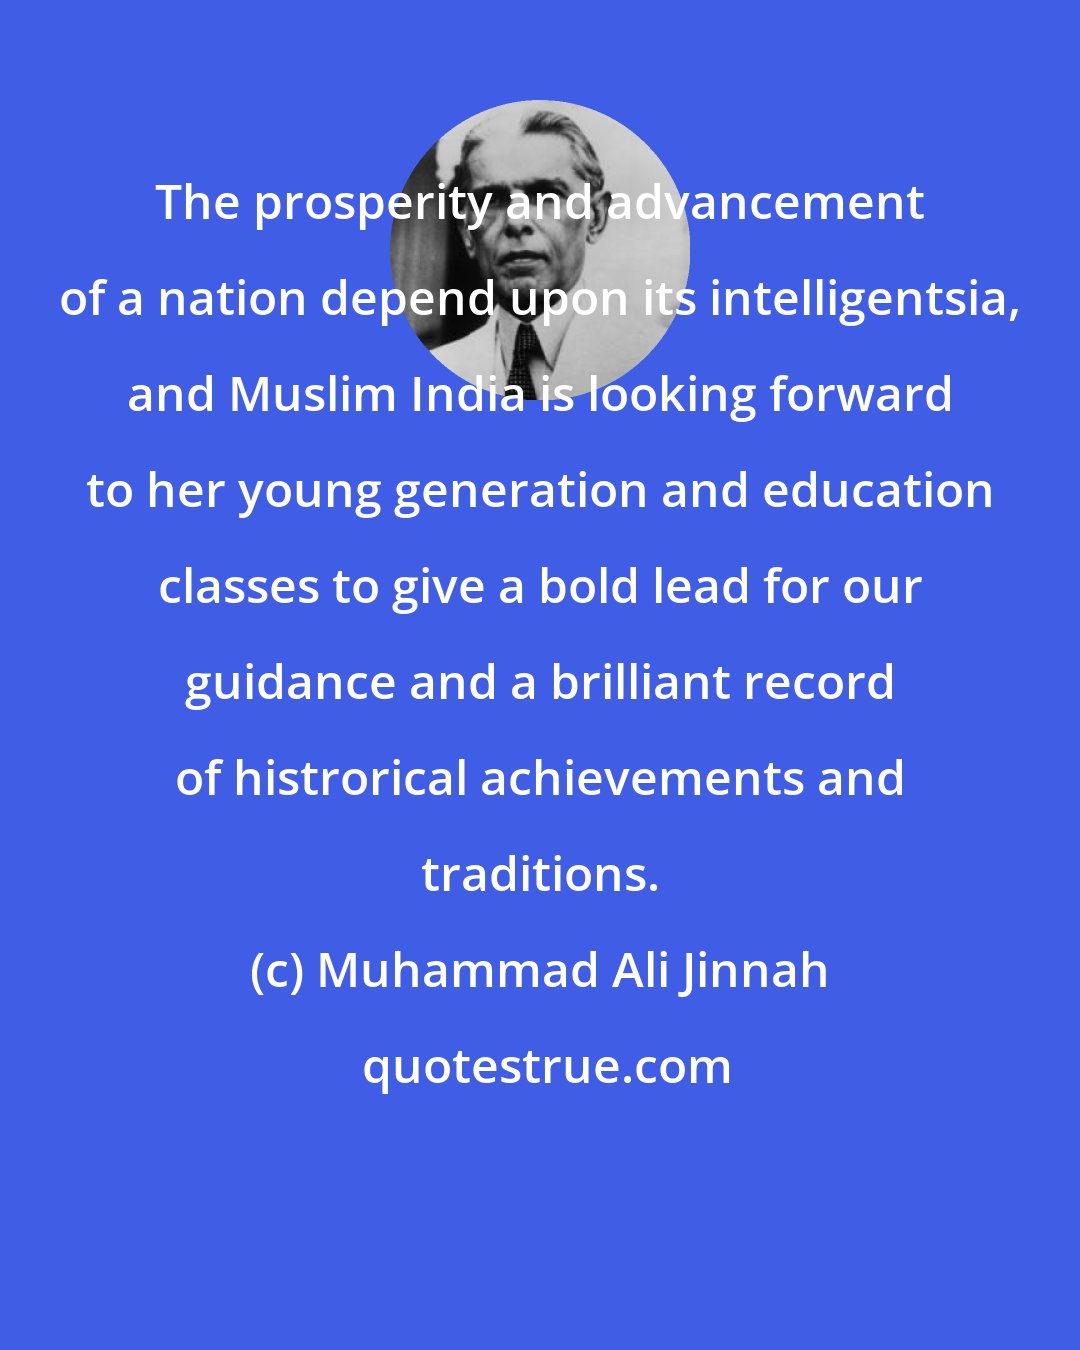 Muhammad Ali Jinnah: The prosperity and advancement of a nation depend upon its intelligentsia, and Muslim India is looking forward to her young generation and education classes to give a bold lead for our guidance and a brilliant record of histrorical achievements and traditions.